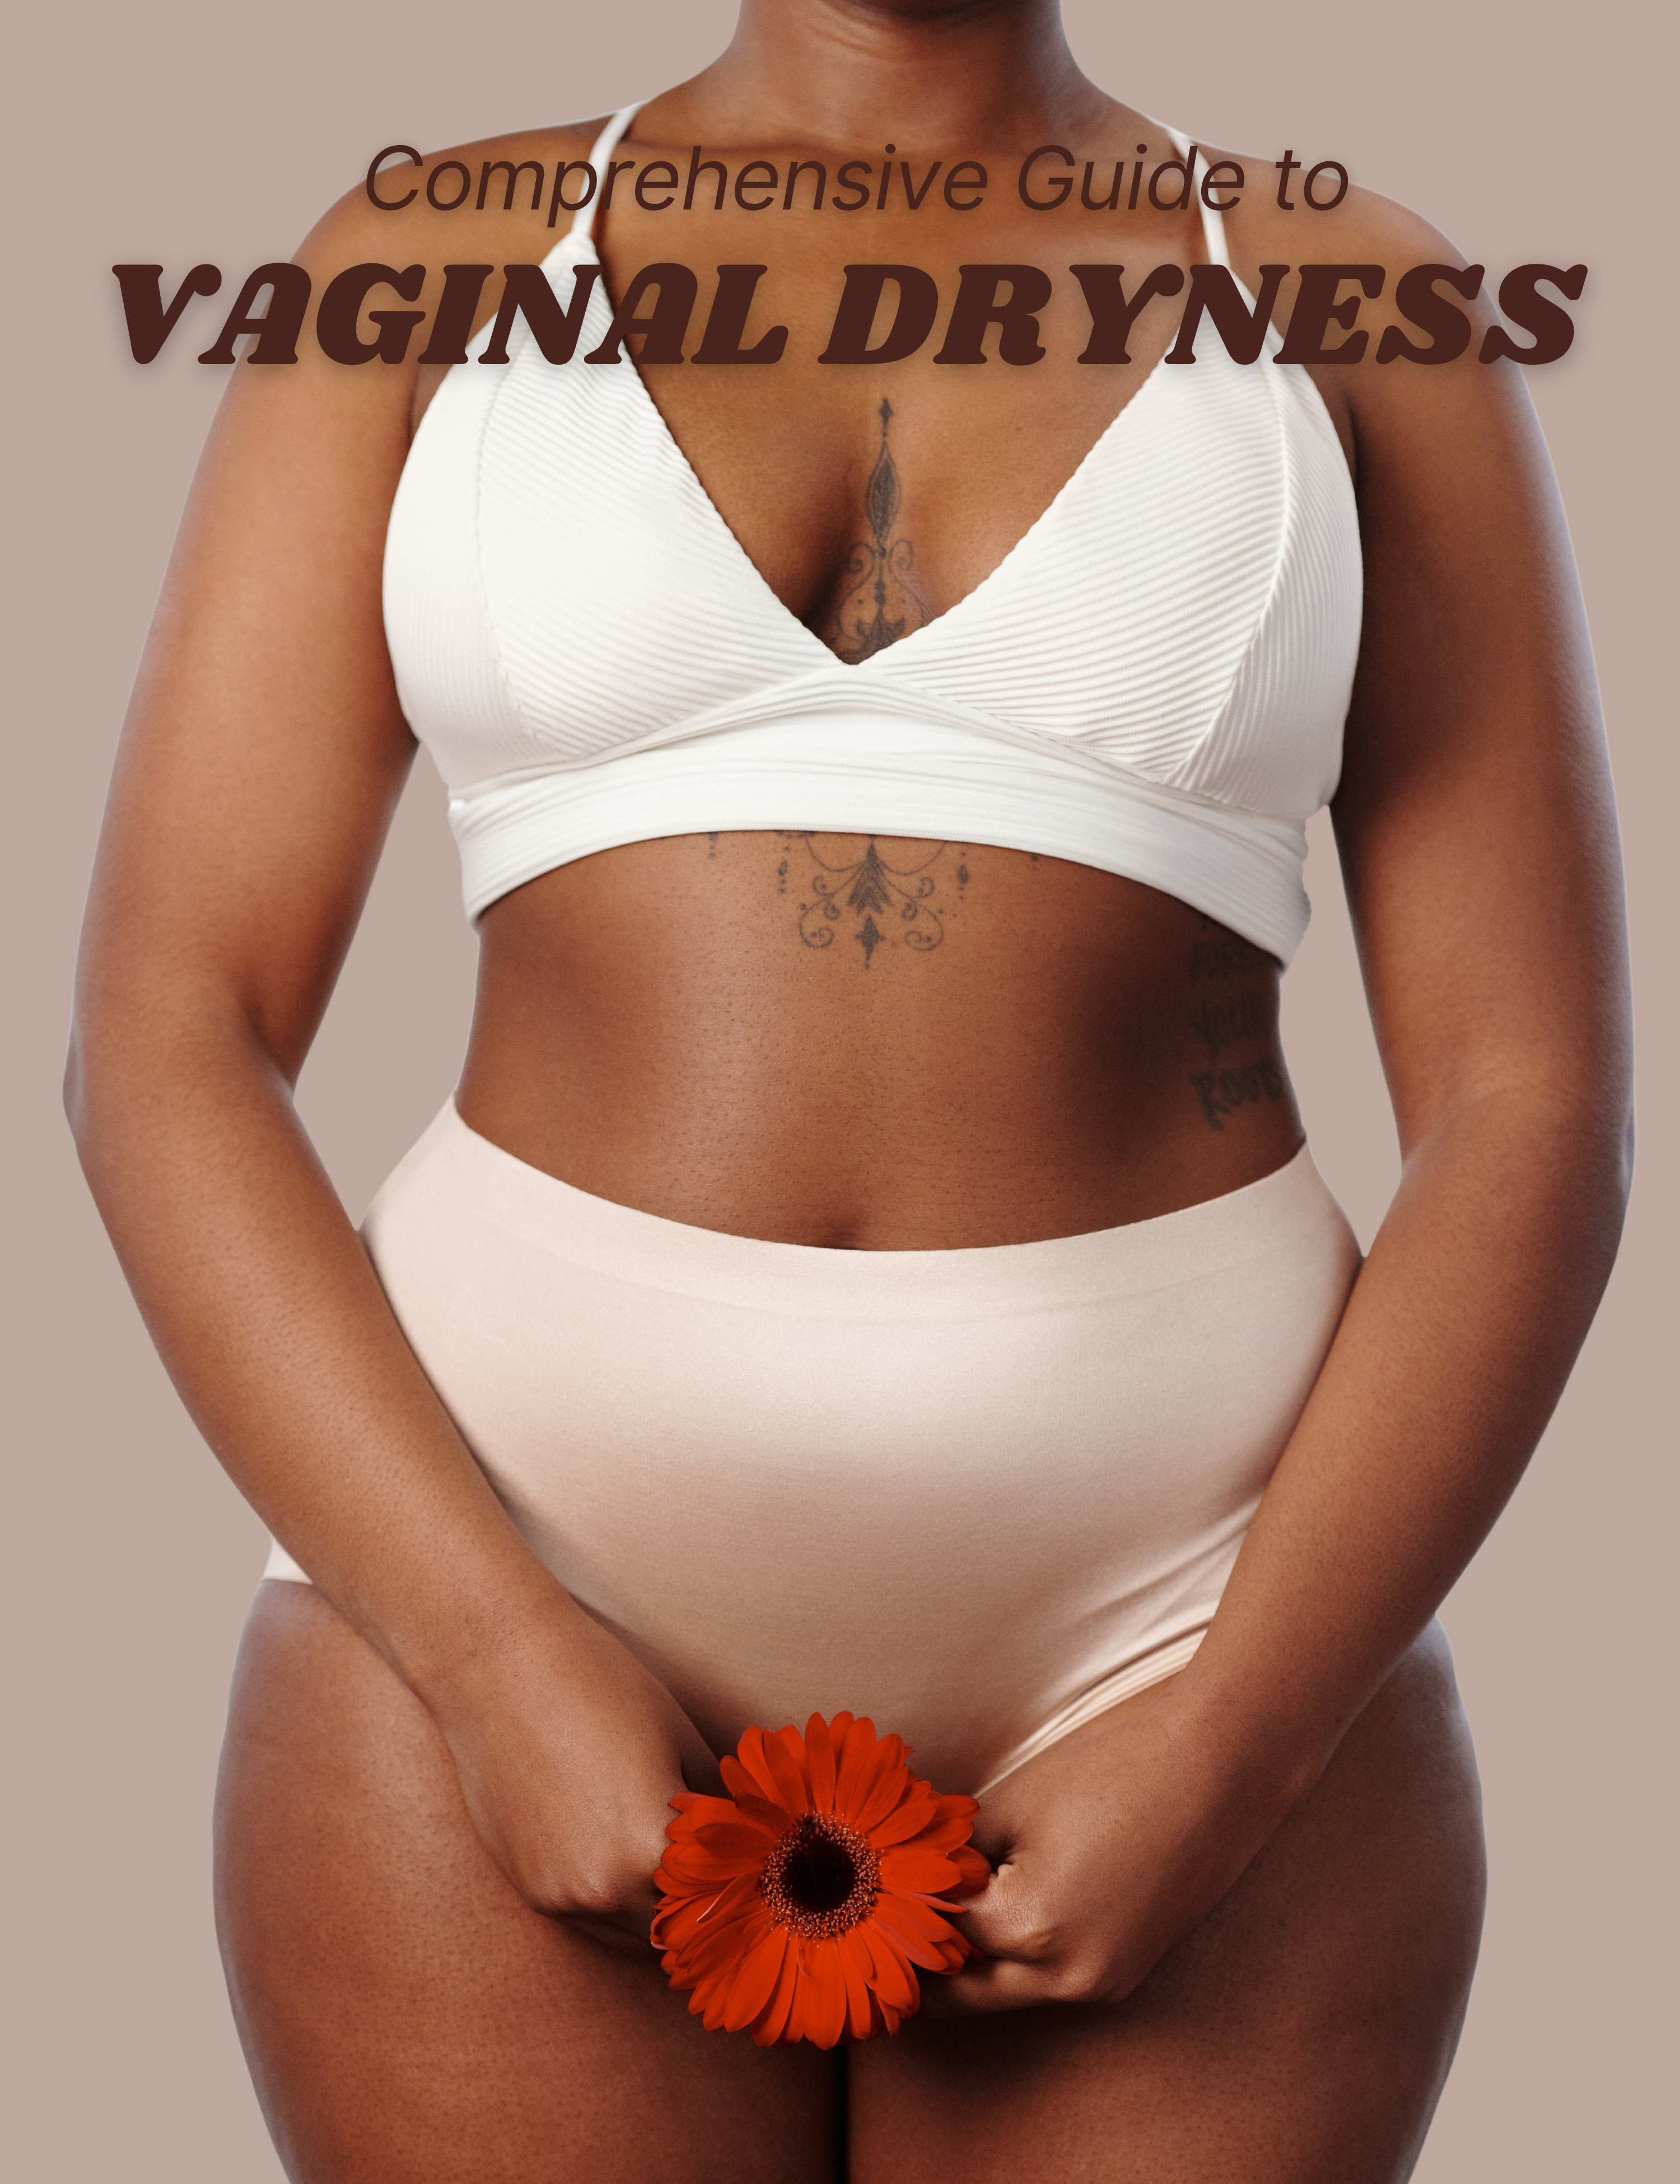 Comprehensive Guide to Vaginal Dryness: Causes, Symptoms, and Effective Natural Remedies for Relief